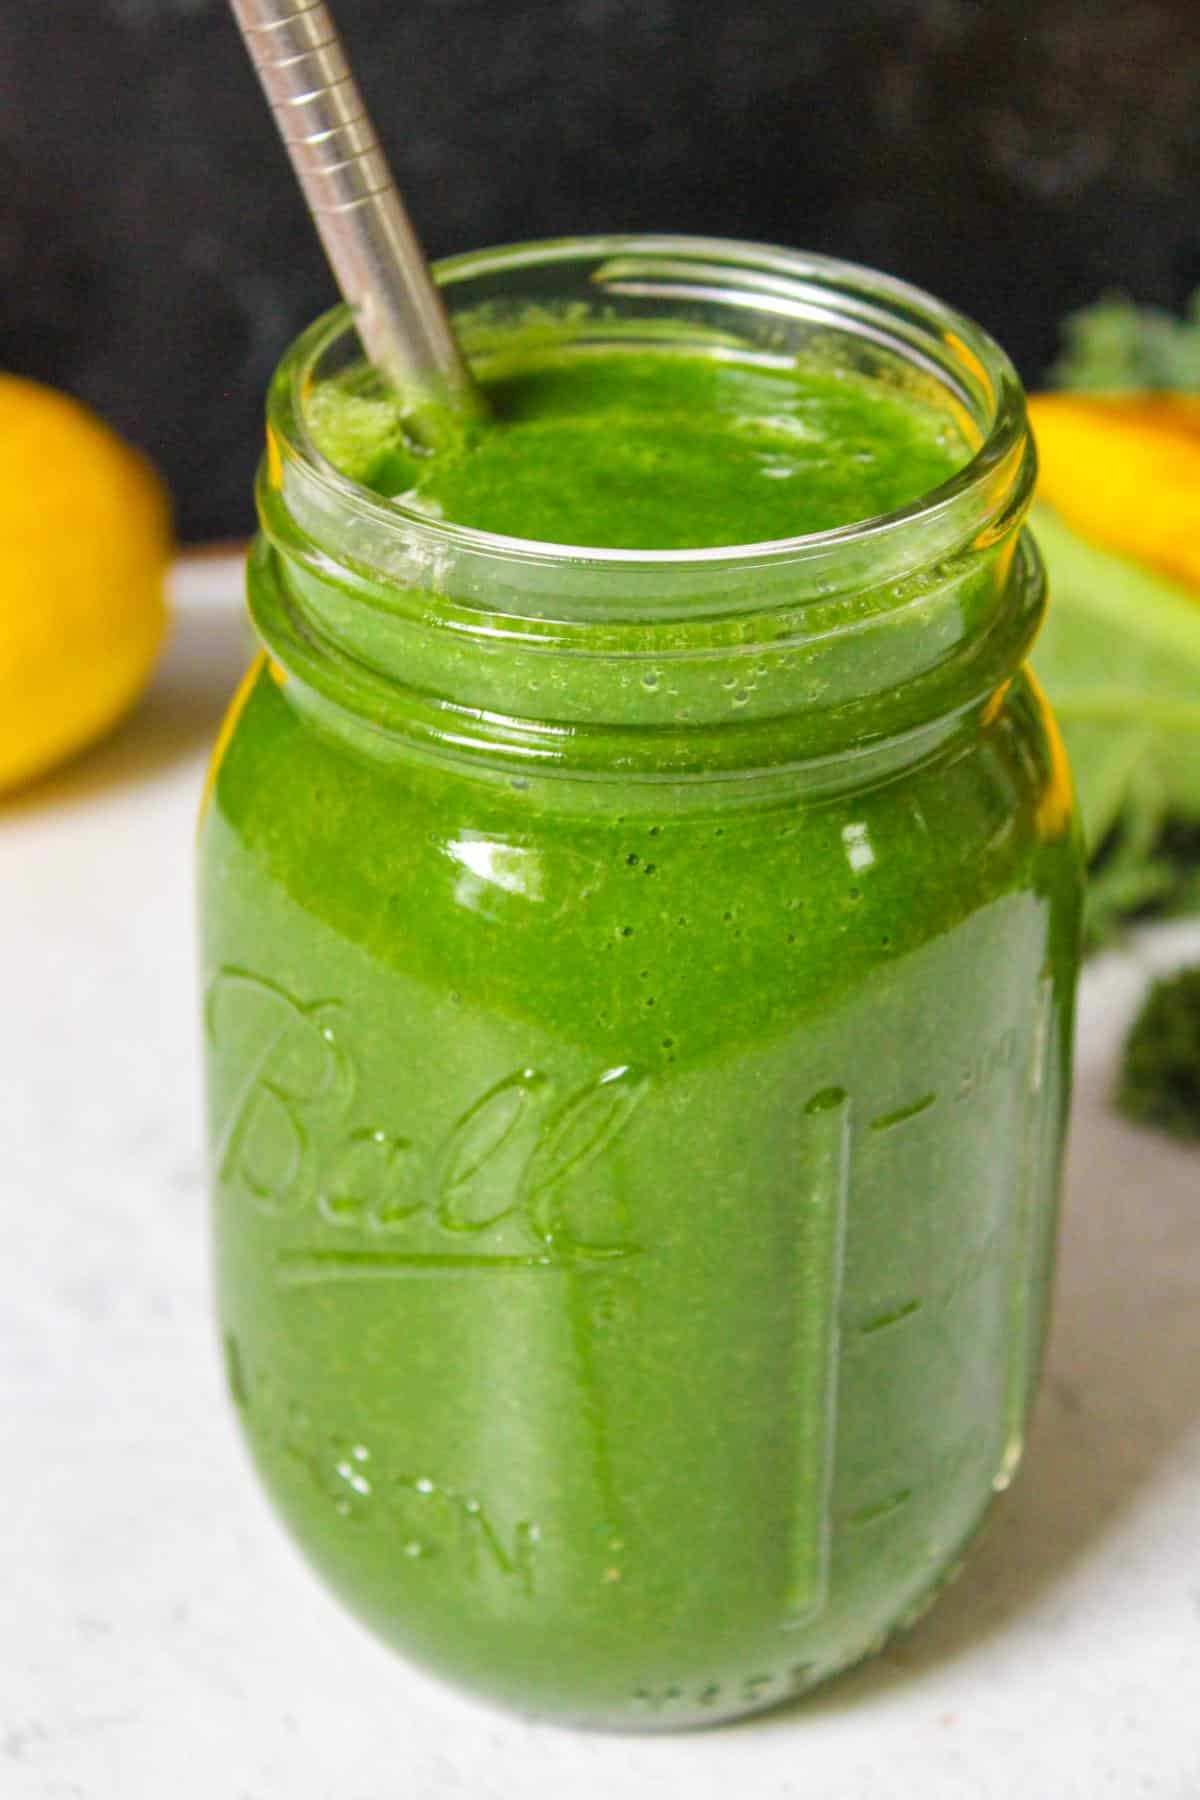 Green spirulina smoothie in a glass mason jar with a metal straw and fruit in the background.